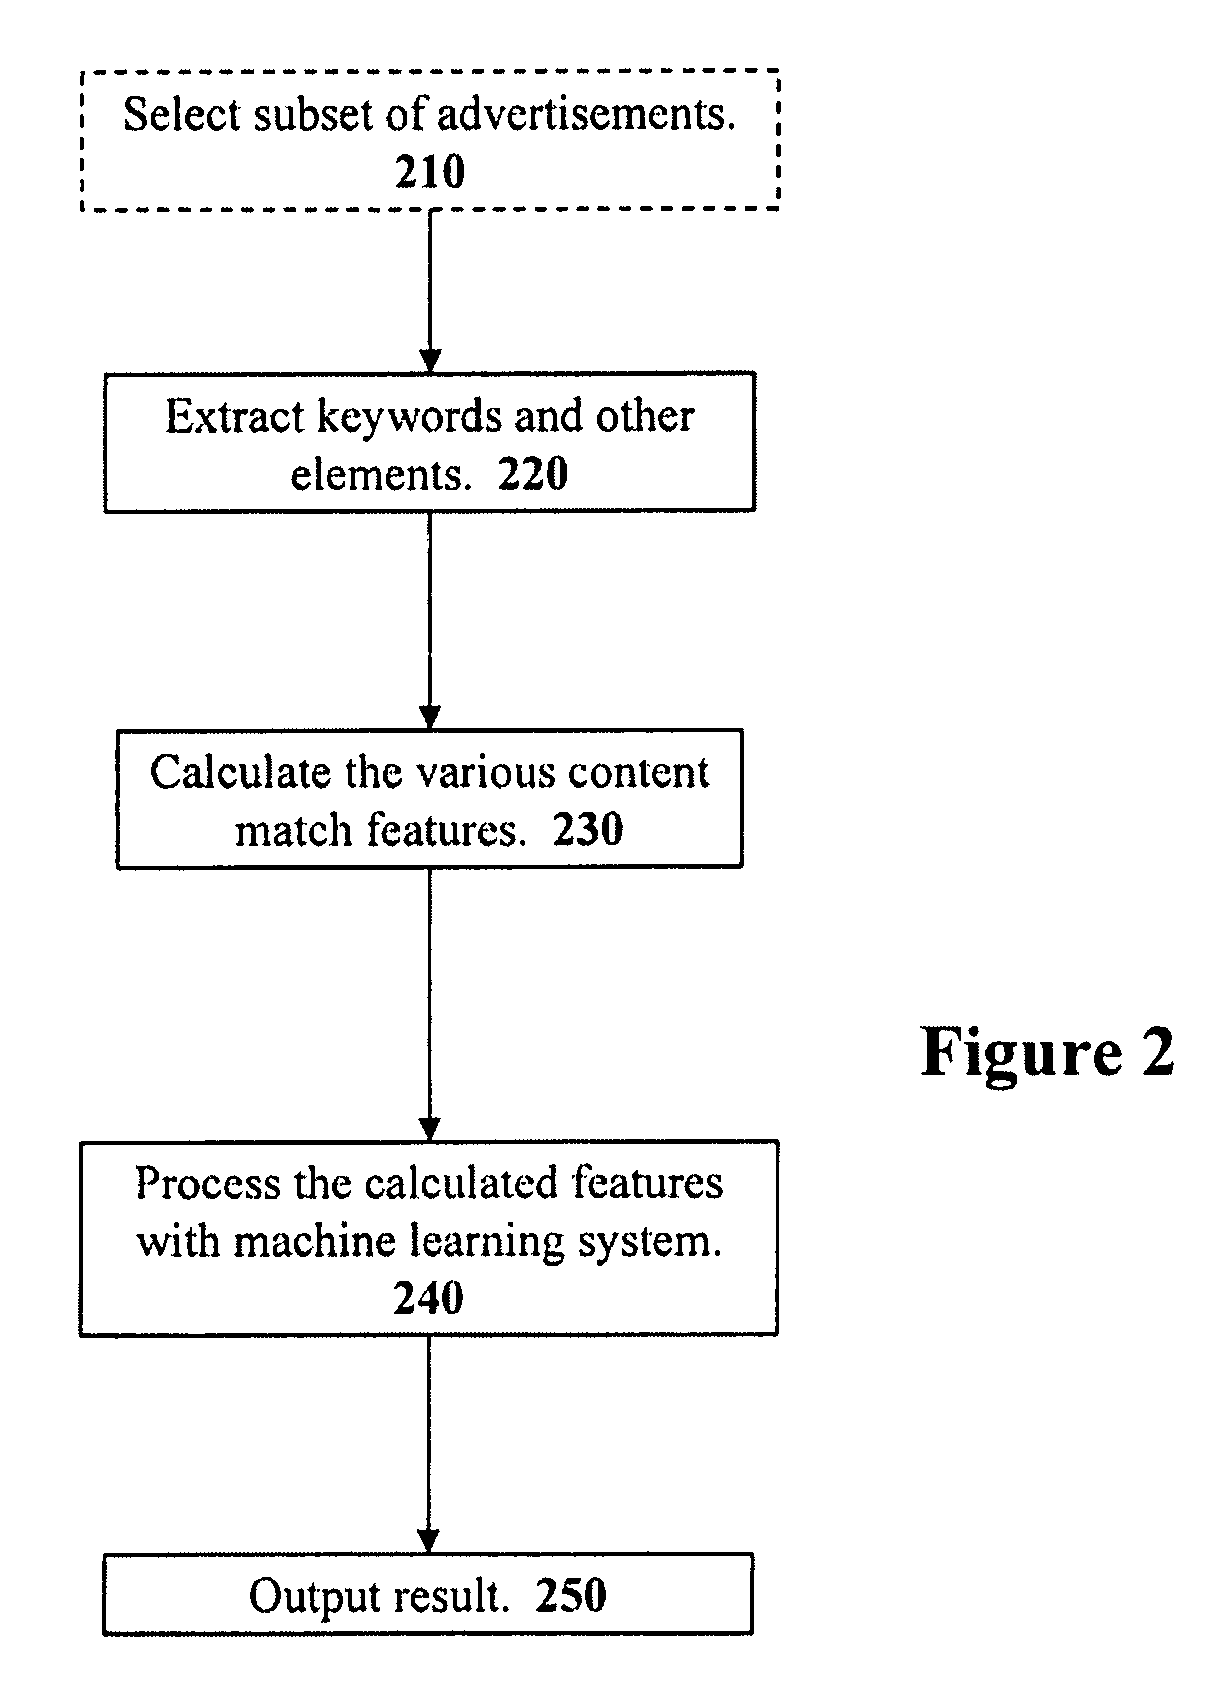 Method for selecting electronic advertisements using machine translation techniques